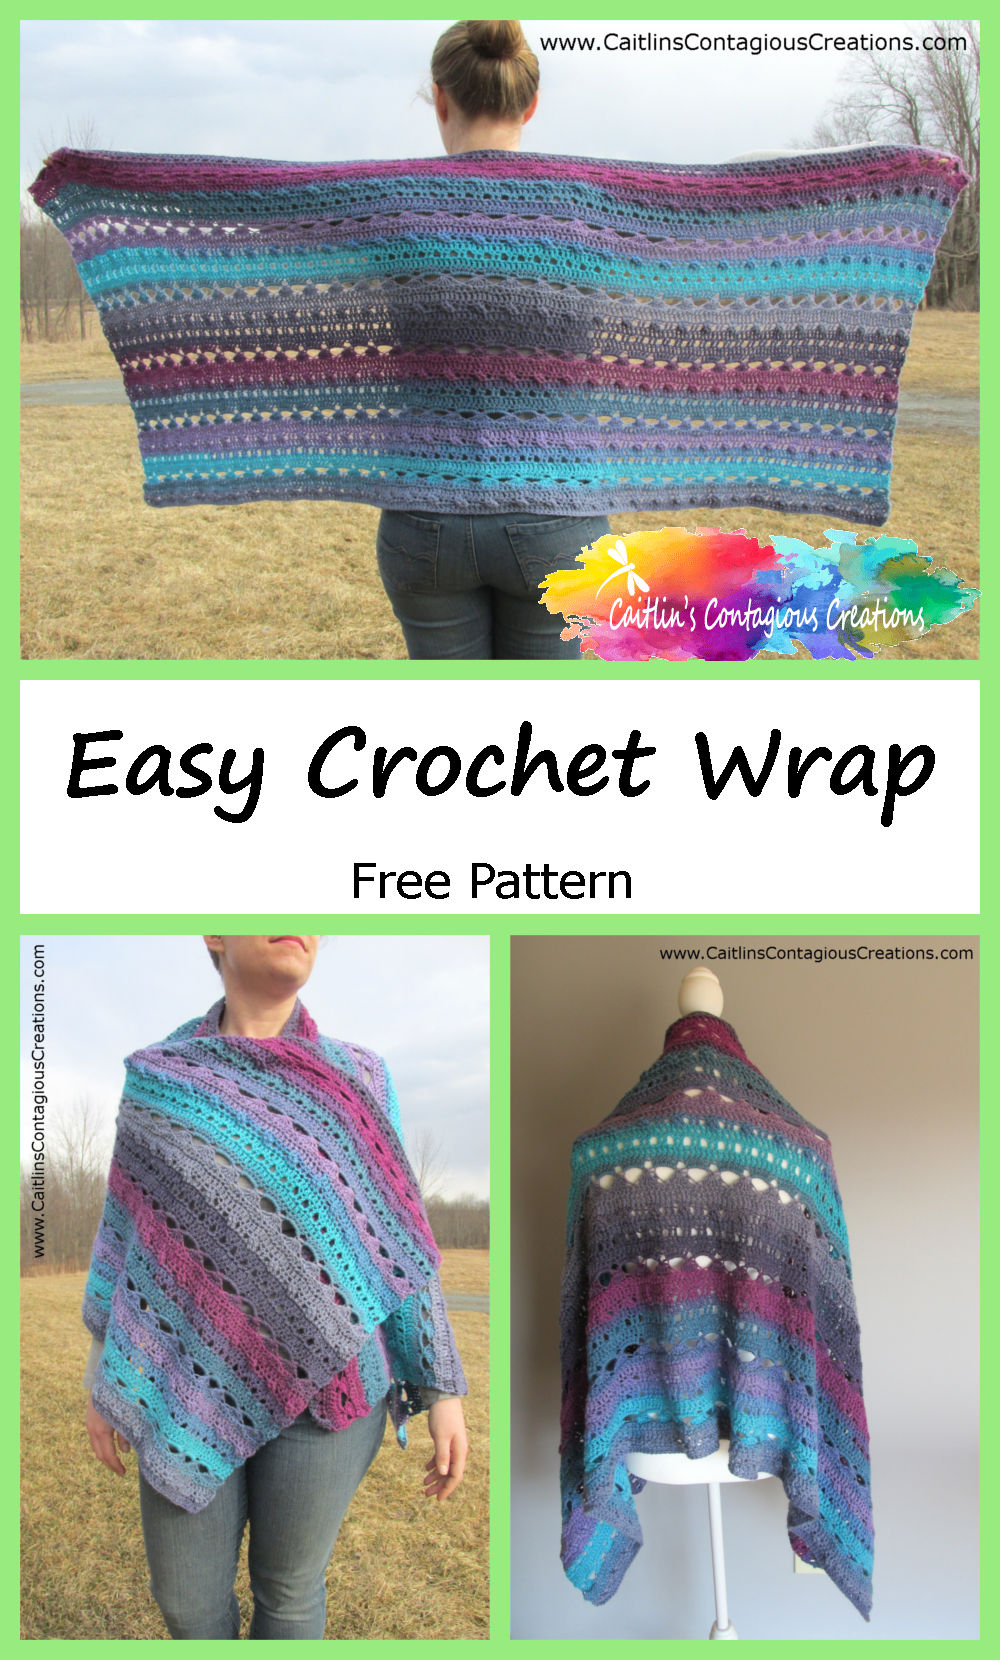 Free Greek Goddess Wrap Crochet Pattern, a fun and quick rectangle shawl crochet design from Caitlin's Contagious Creations. Make your own prayer shawl today! #ShawlCrochetPattern #FunCrochetPattern #FreeCrochetDesign